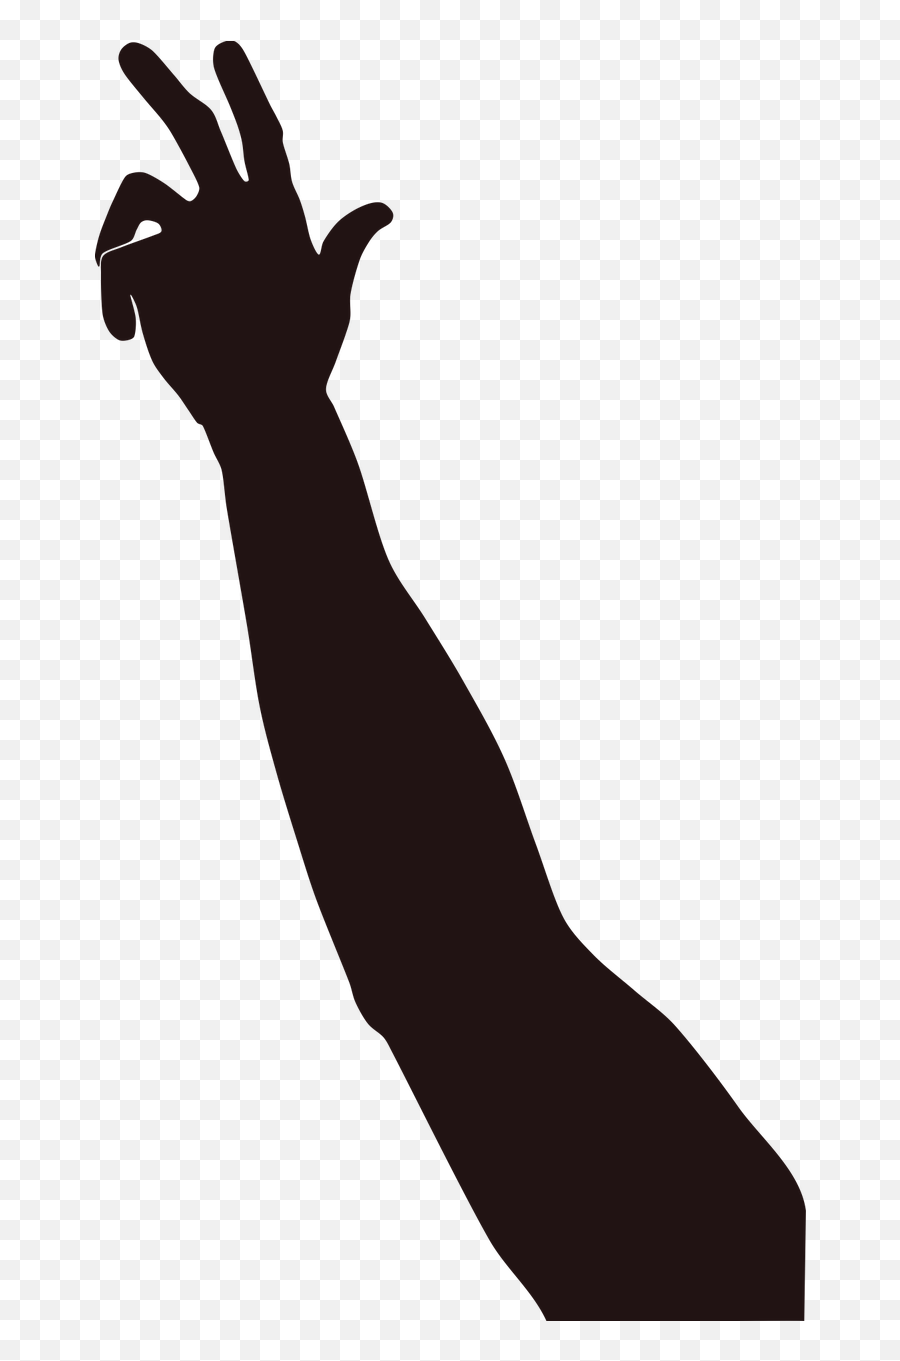 Hand Reach Silhouette Isolated Black - Silhouette Of Arm Reaching Emoji,Raised Hands Emoticon